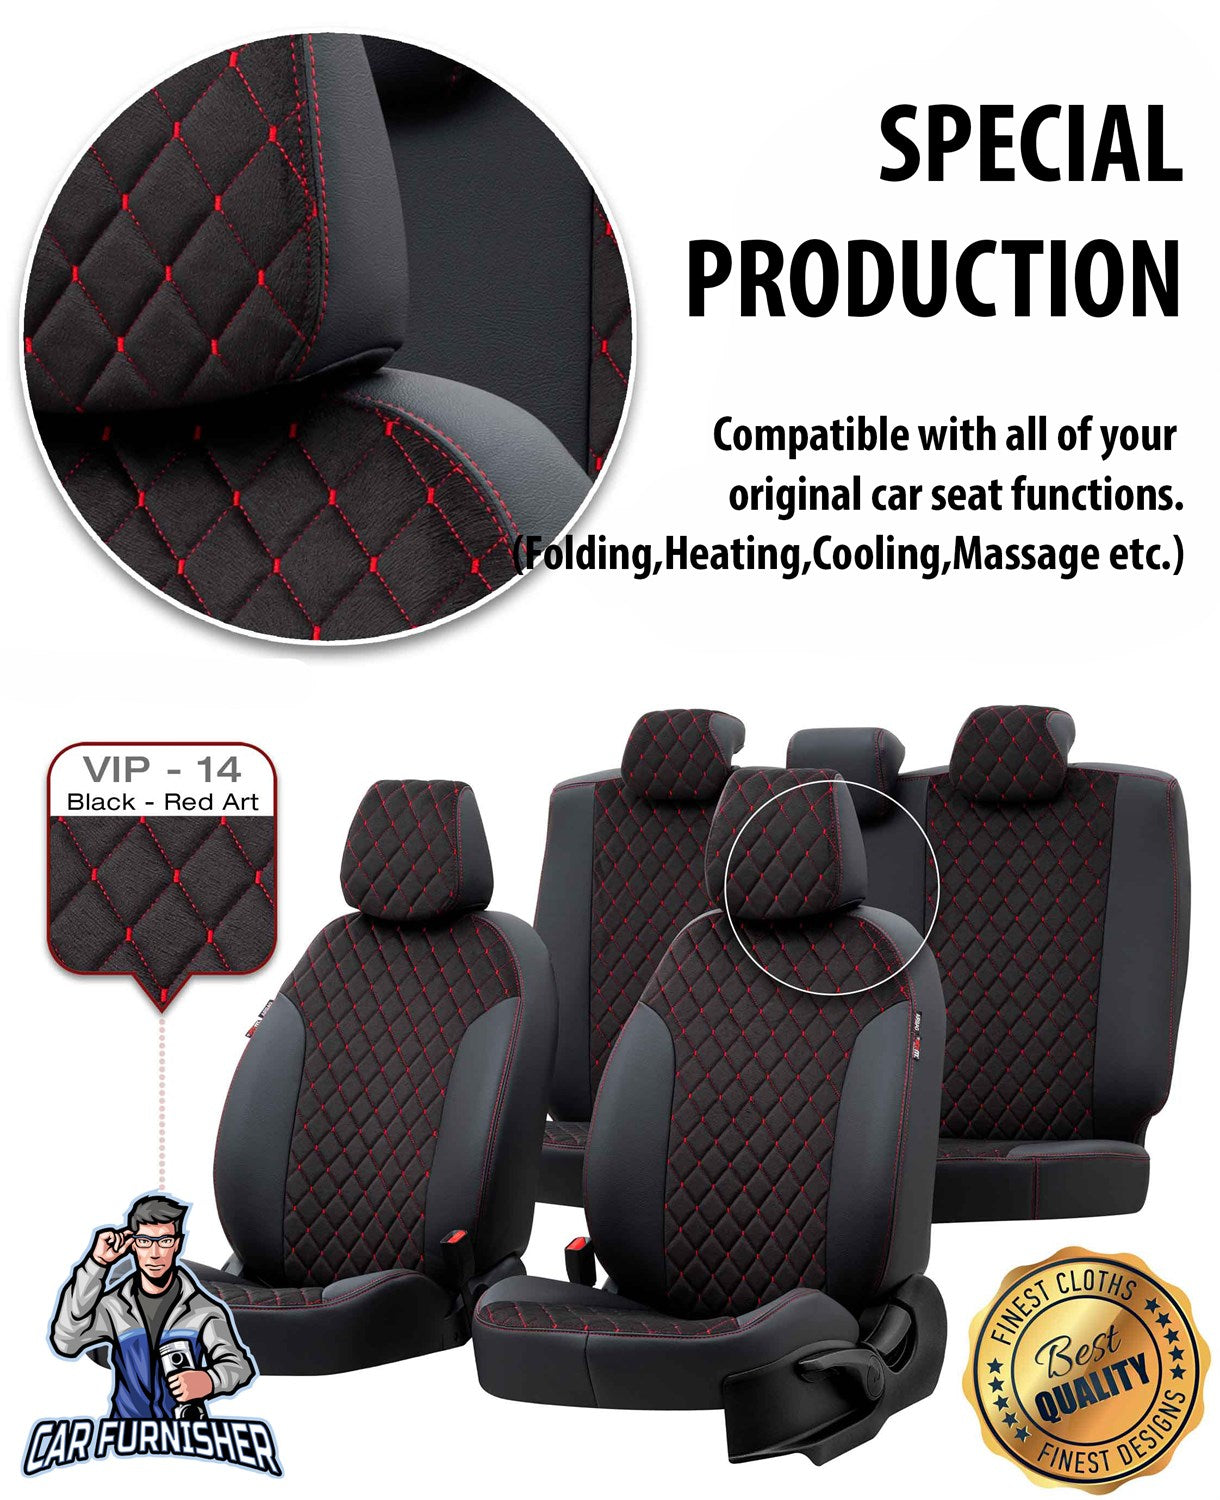 Volkswagen Bora Seat Cover Madrid Foal Feather Design Red Leather & Foal Feather